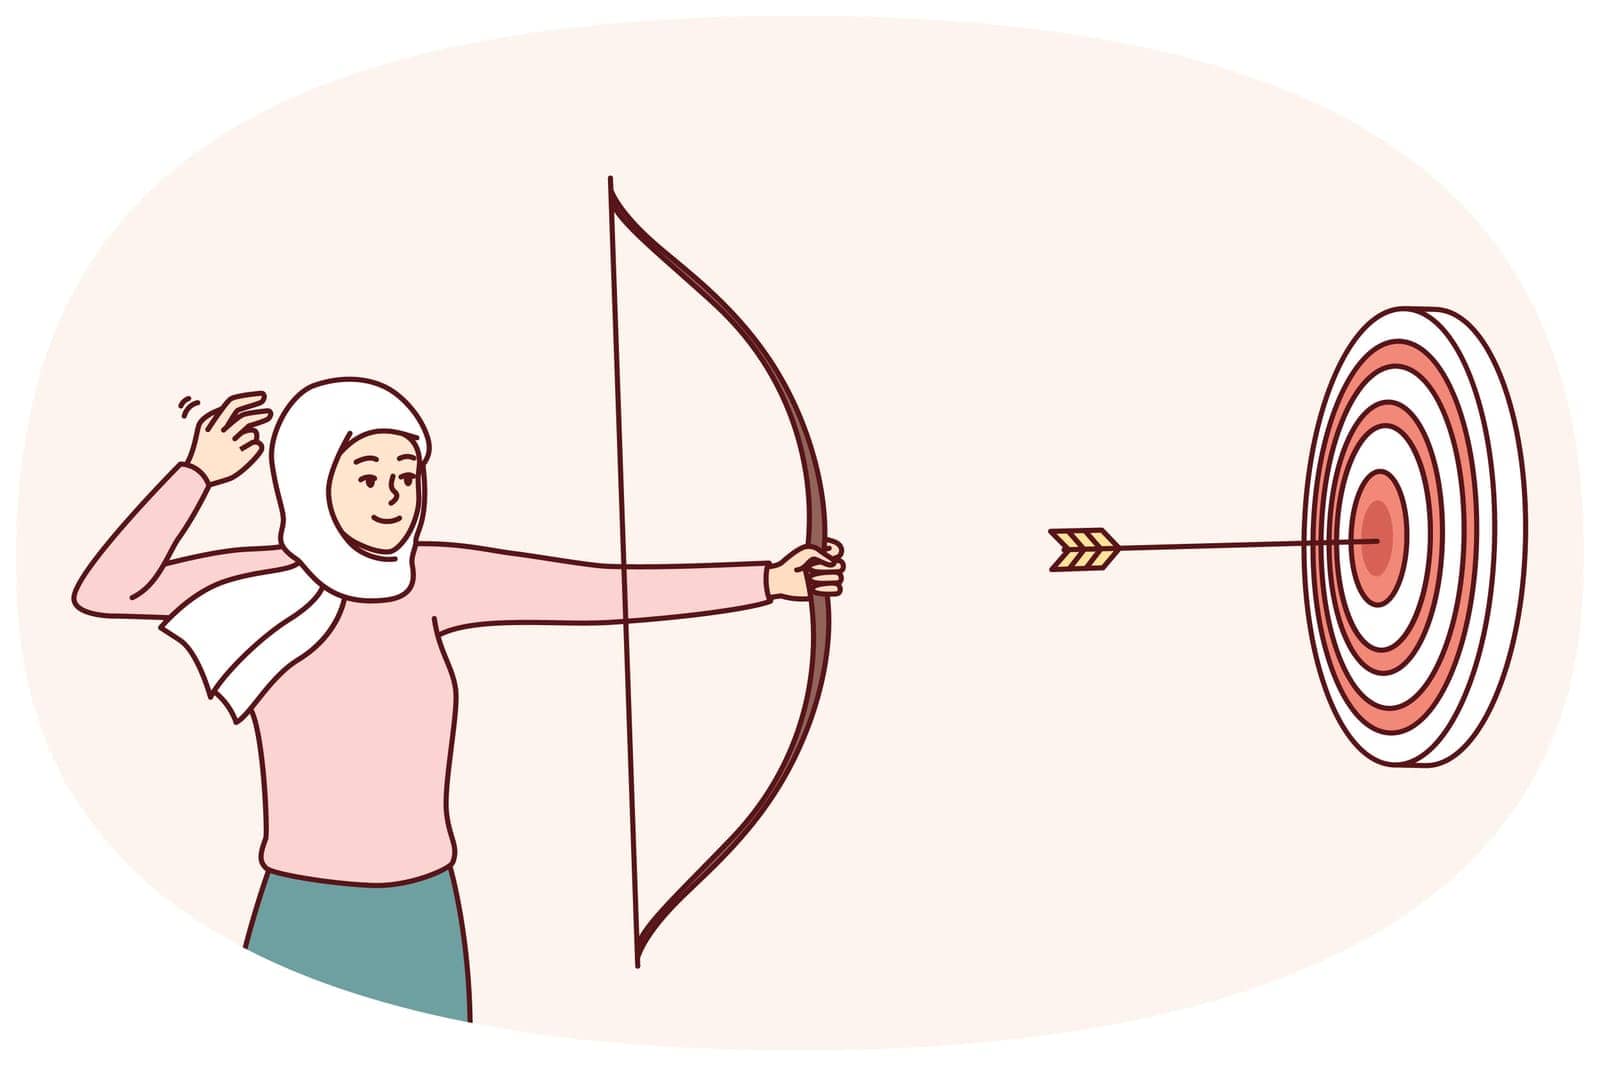 Woman in Islamic headscarf covering hair shoots at target with bow hitting middle by Vasilyeva